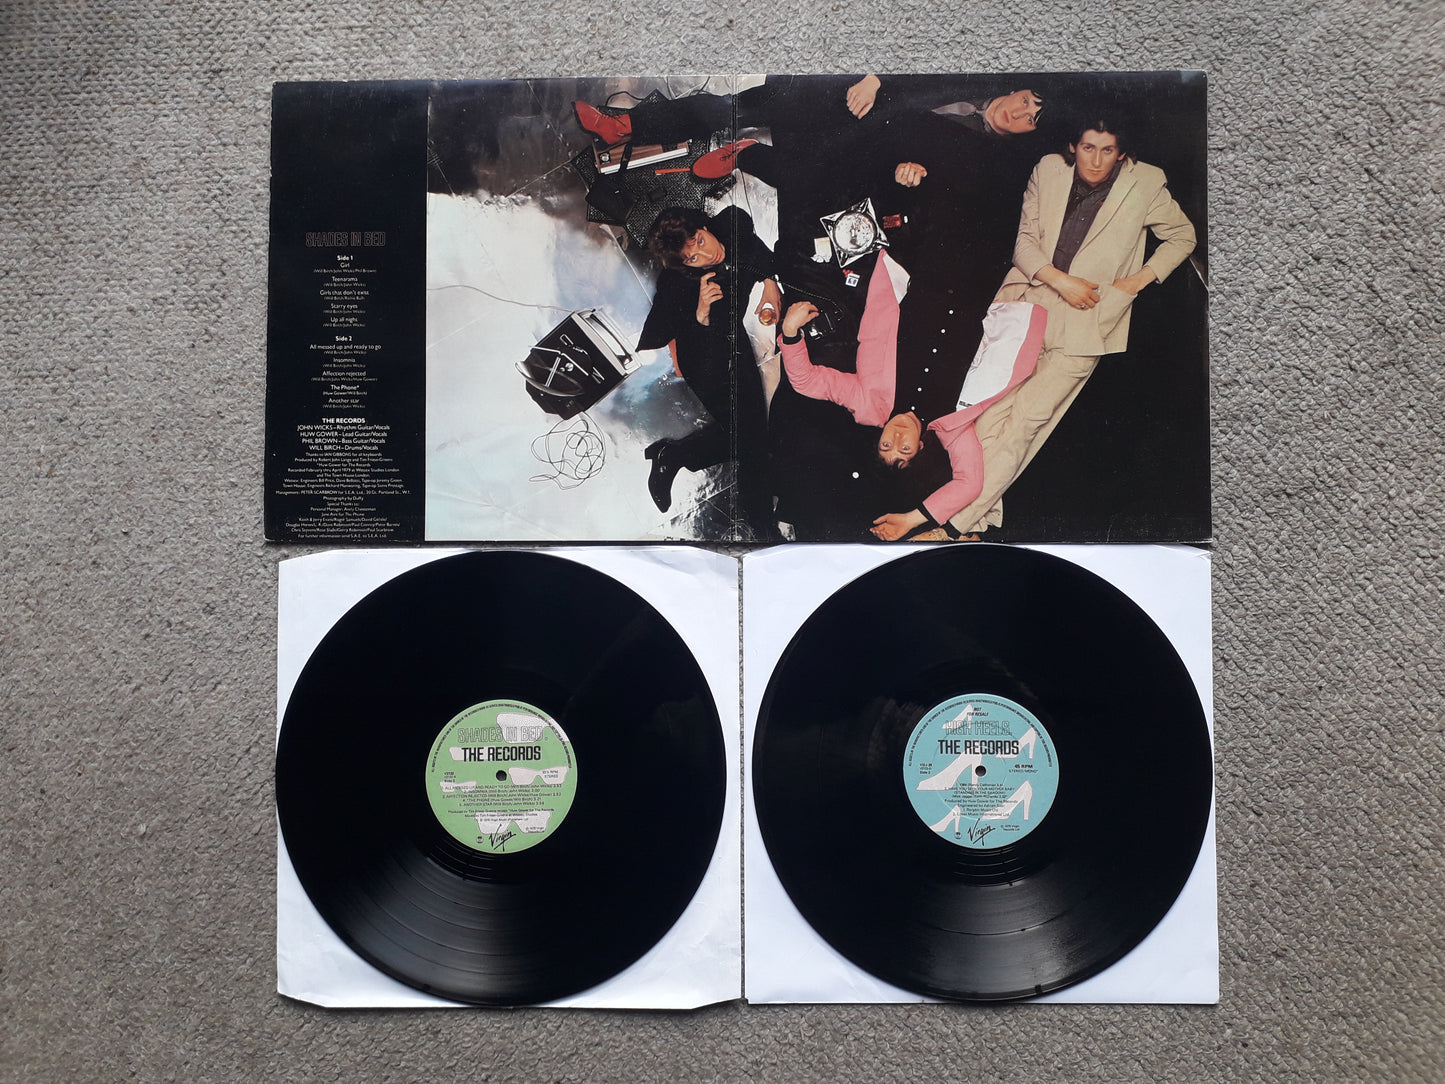 The Records-Shades In Bed LP + Limited 12" EP (V2122)